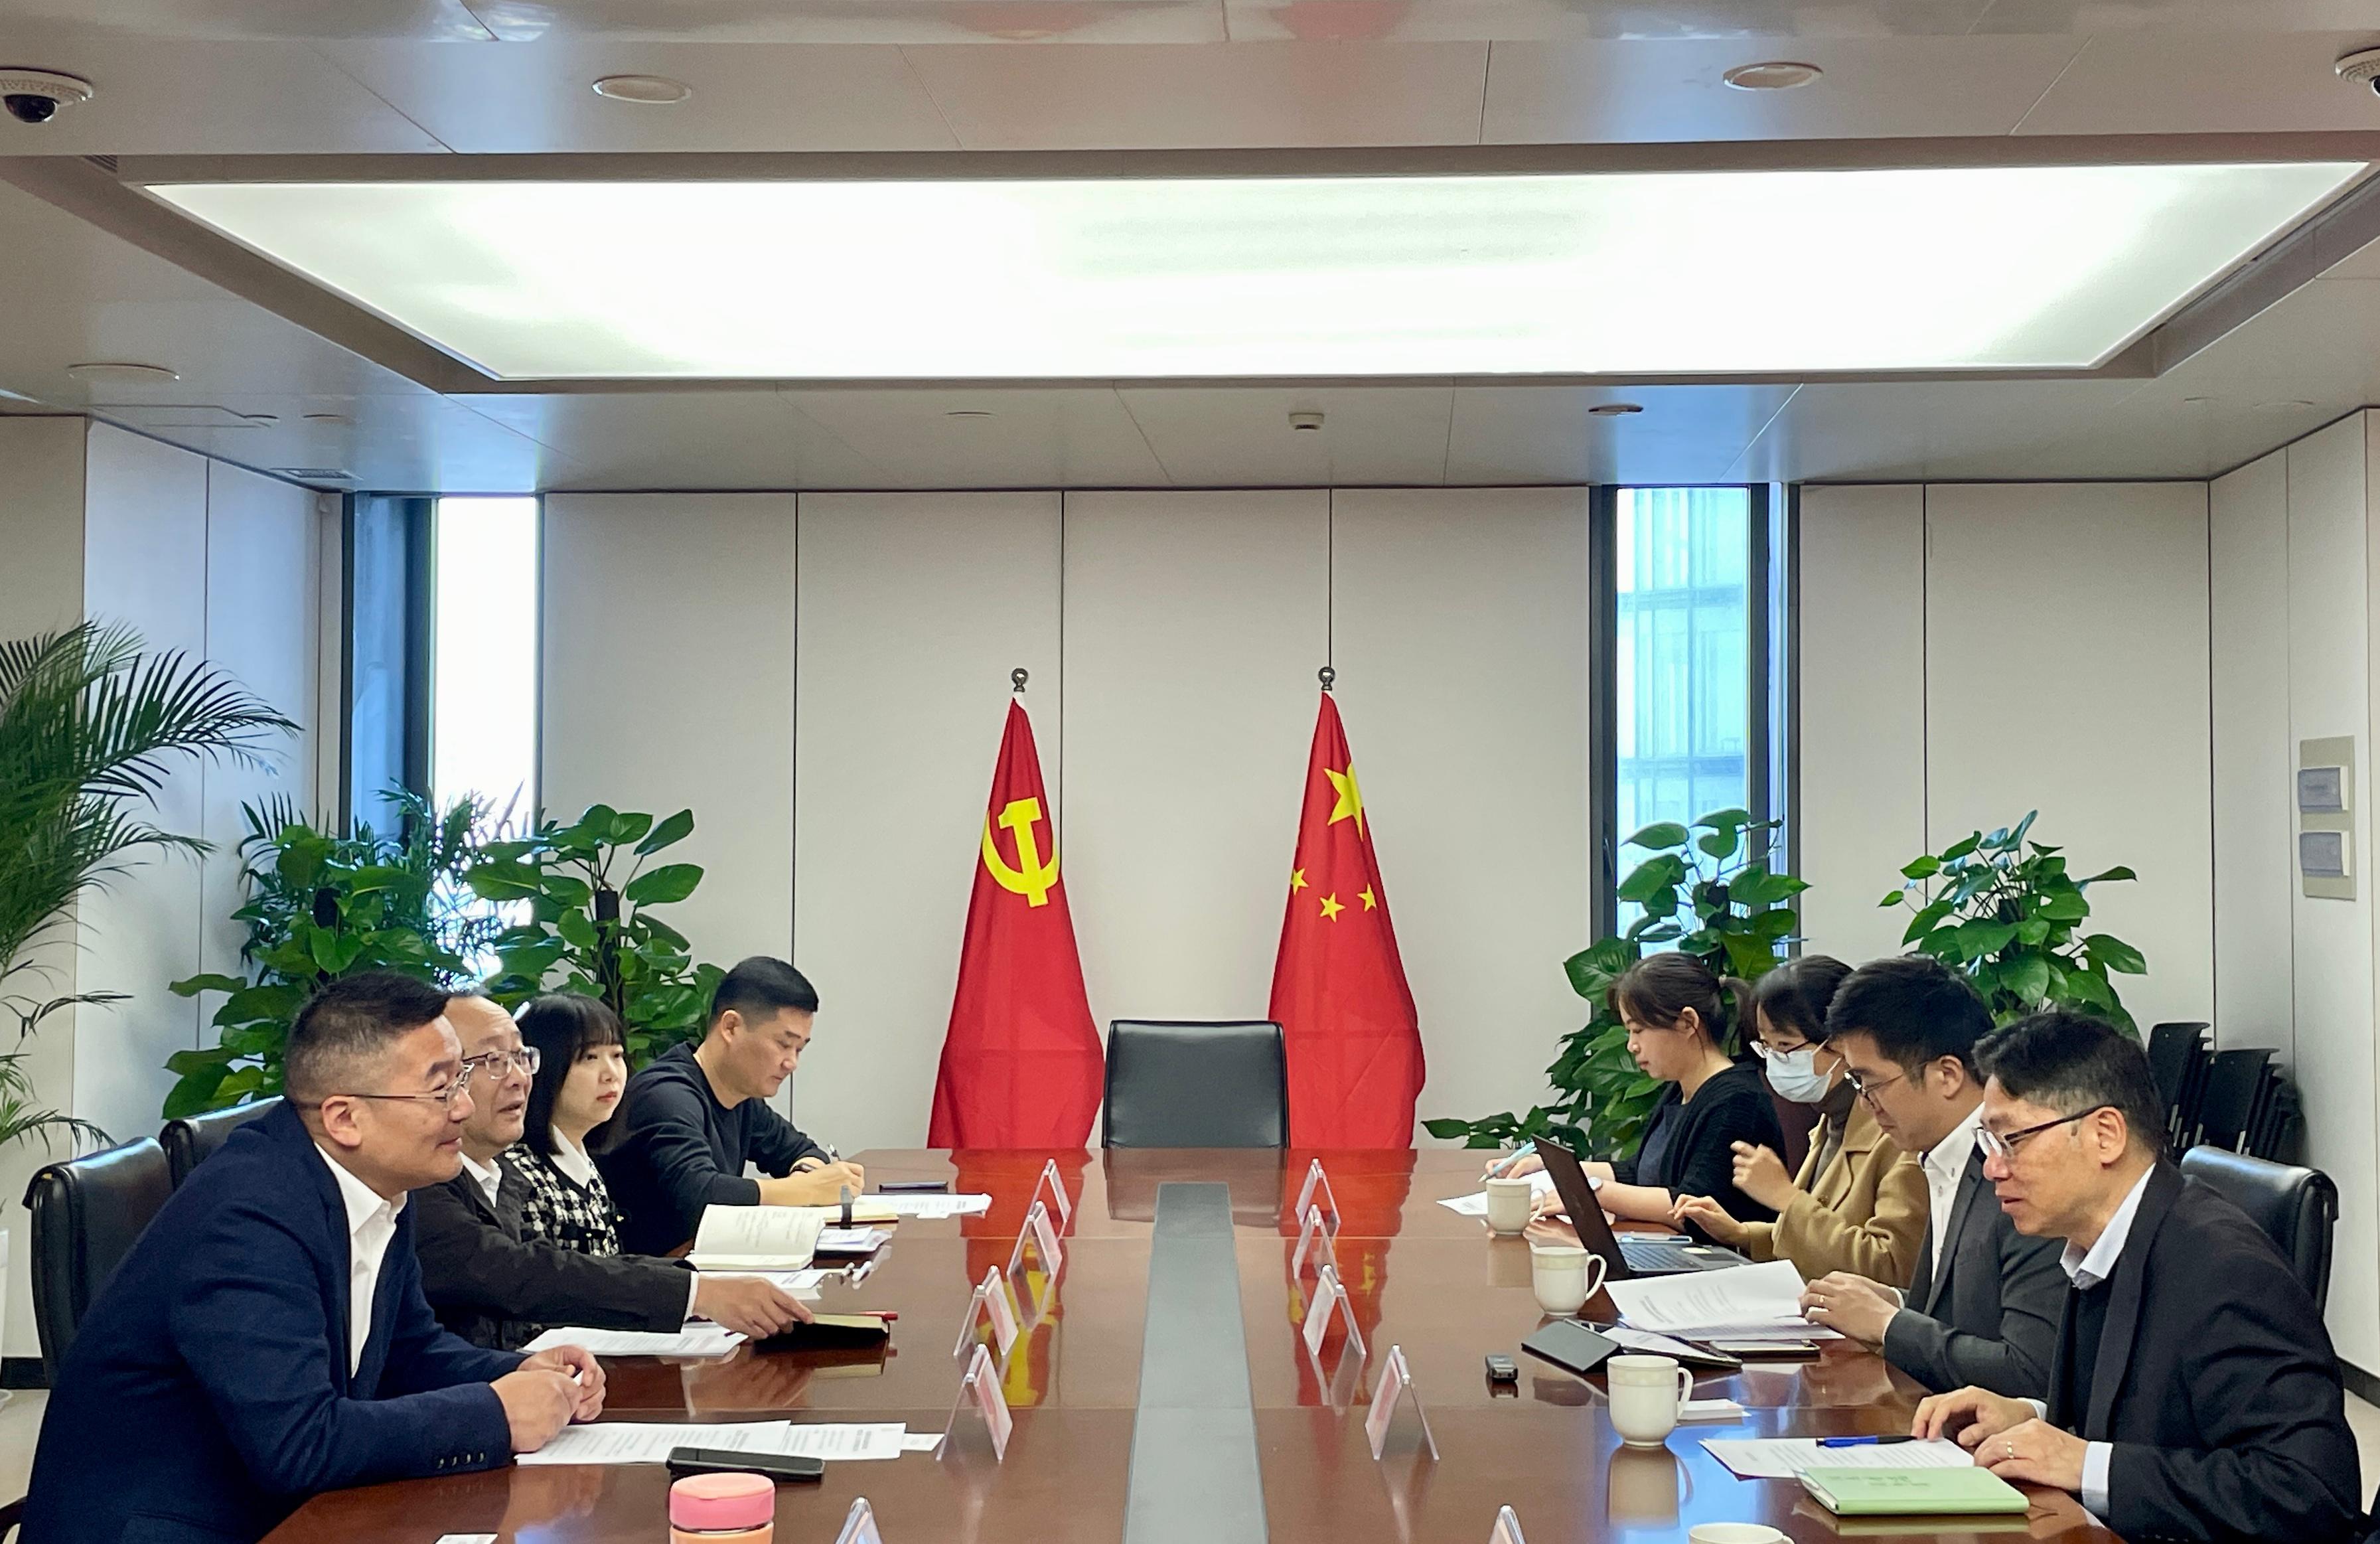 The Secretary for Transport and Logistics, Mr Lam Sai-hung (first right), meets with representatives of the Hangzhou Transportation Bureau, the Hangzhou Municipal Bureau of Economy and Informatization, as well as the Hangzhou Traffic Police this morning (December 7) to understand their latest transport policies and relevant regulatory work in traffic management.